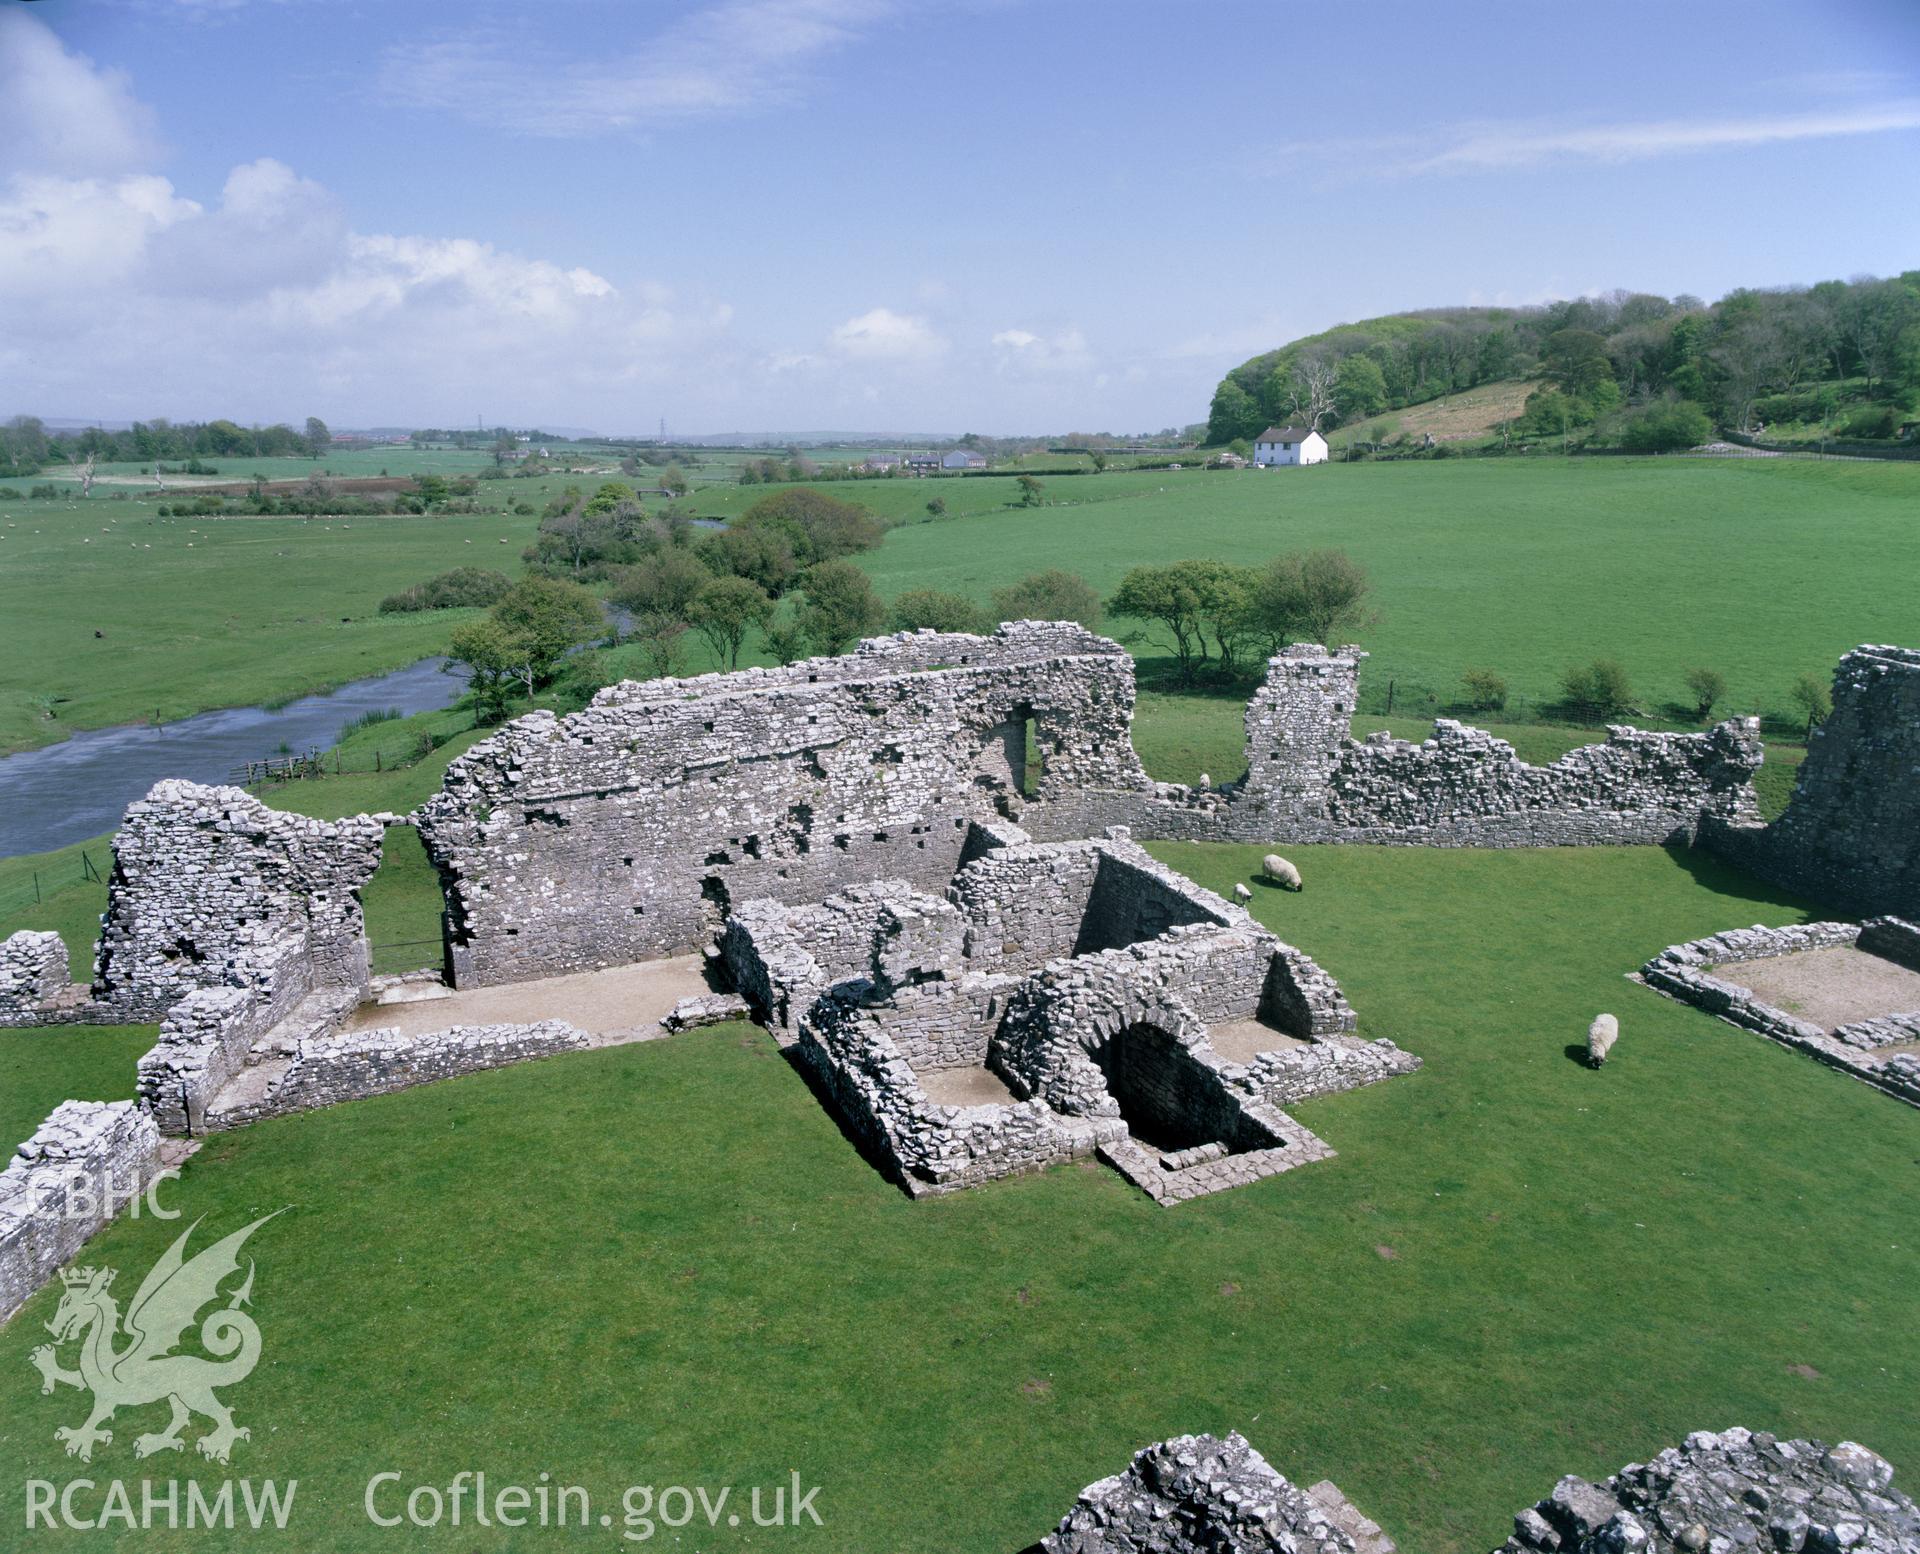 RCAHMW colour transparency showing view of the ruins of Ogmore Castle, taken by Iain Wright, c.1991